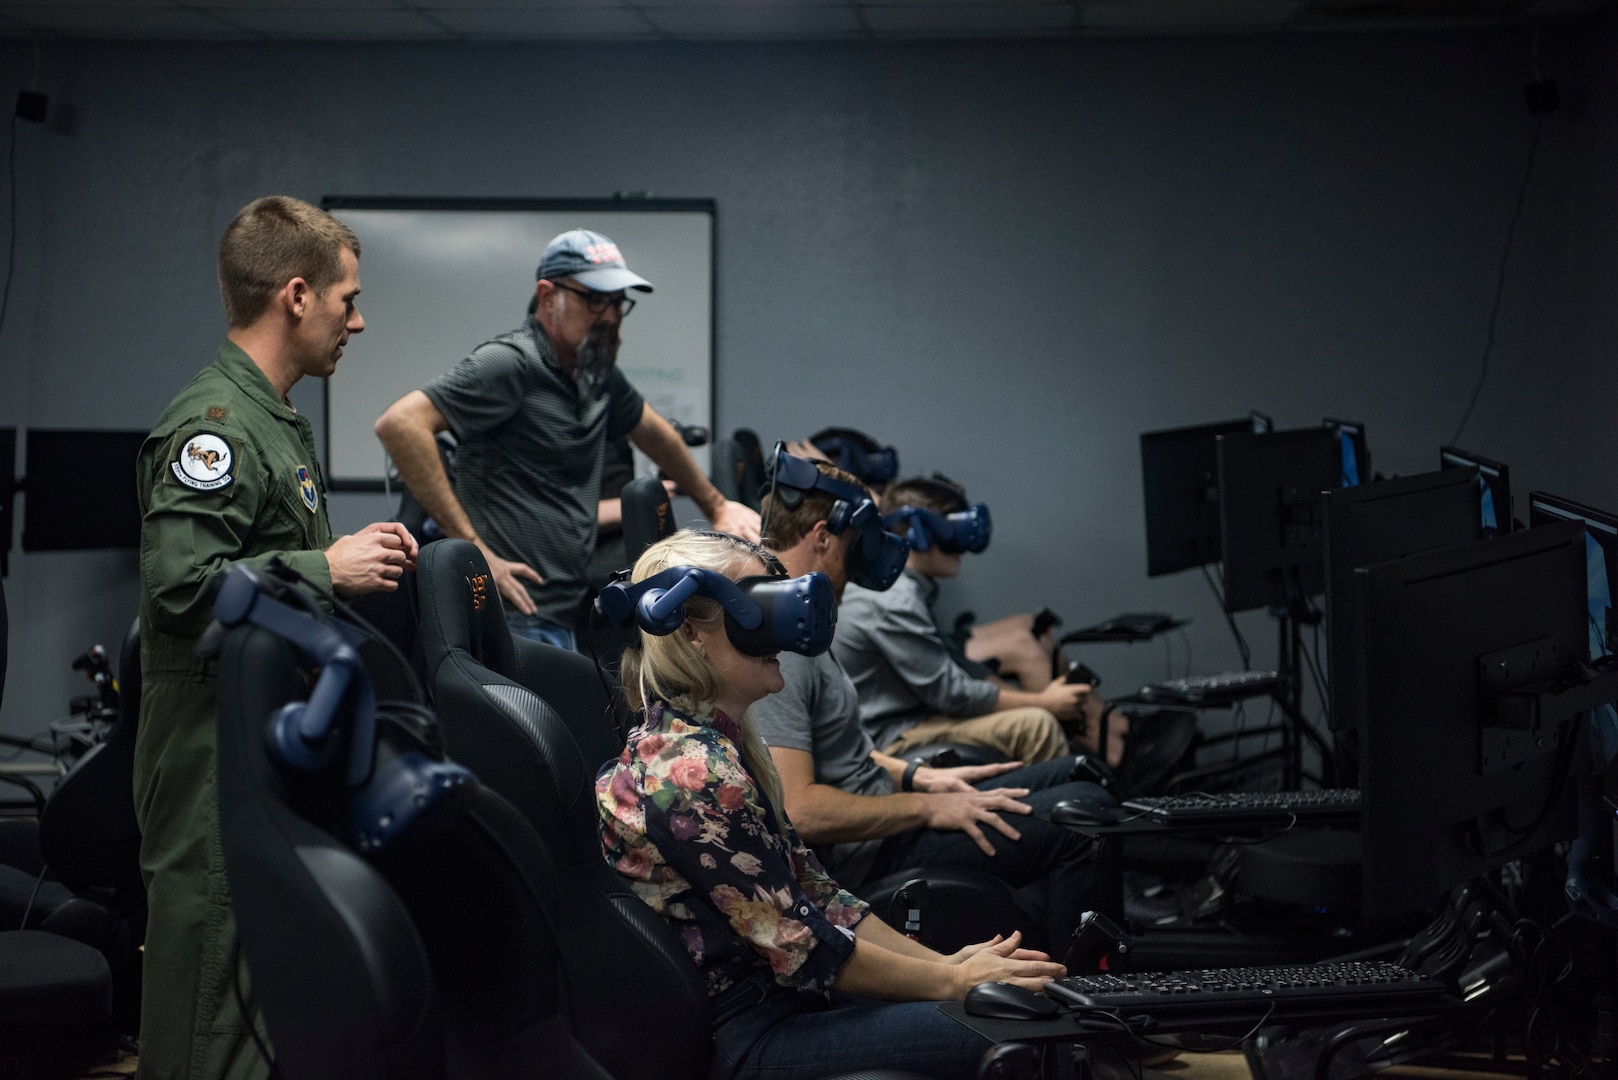 Members of the Leach family experiences a virtual reality trainer March 11, 2019, at the 559th Flying Training Squadron at Joint Base San Antonio-Randolph, Texas. The Leach family, based in Scottsdale, Ariz., spend much of their time traveling the country in “Ginger,” their RV. The video featuring their trip to JBSA-Randolph and their simulator experiences will be presented on the Season 7 premiere of their YouTube series, “Keep Your Daydream.